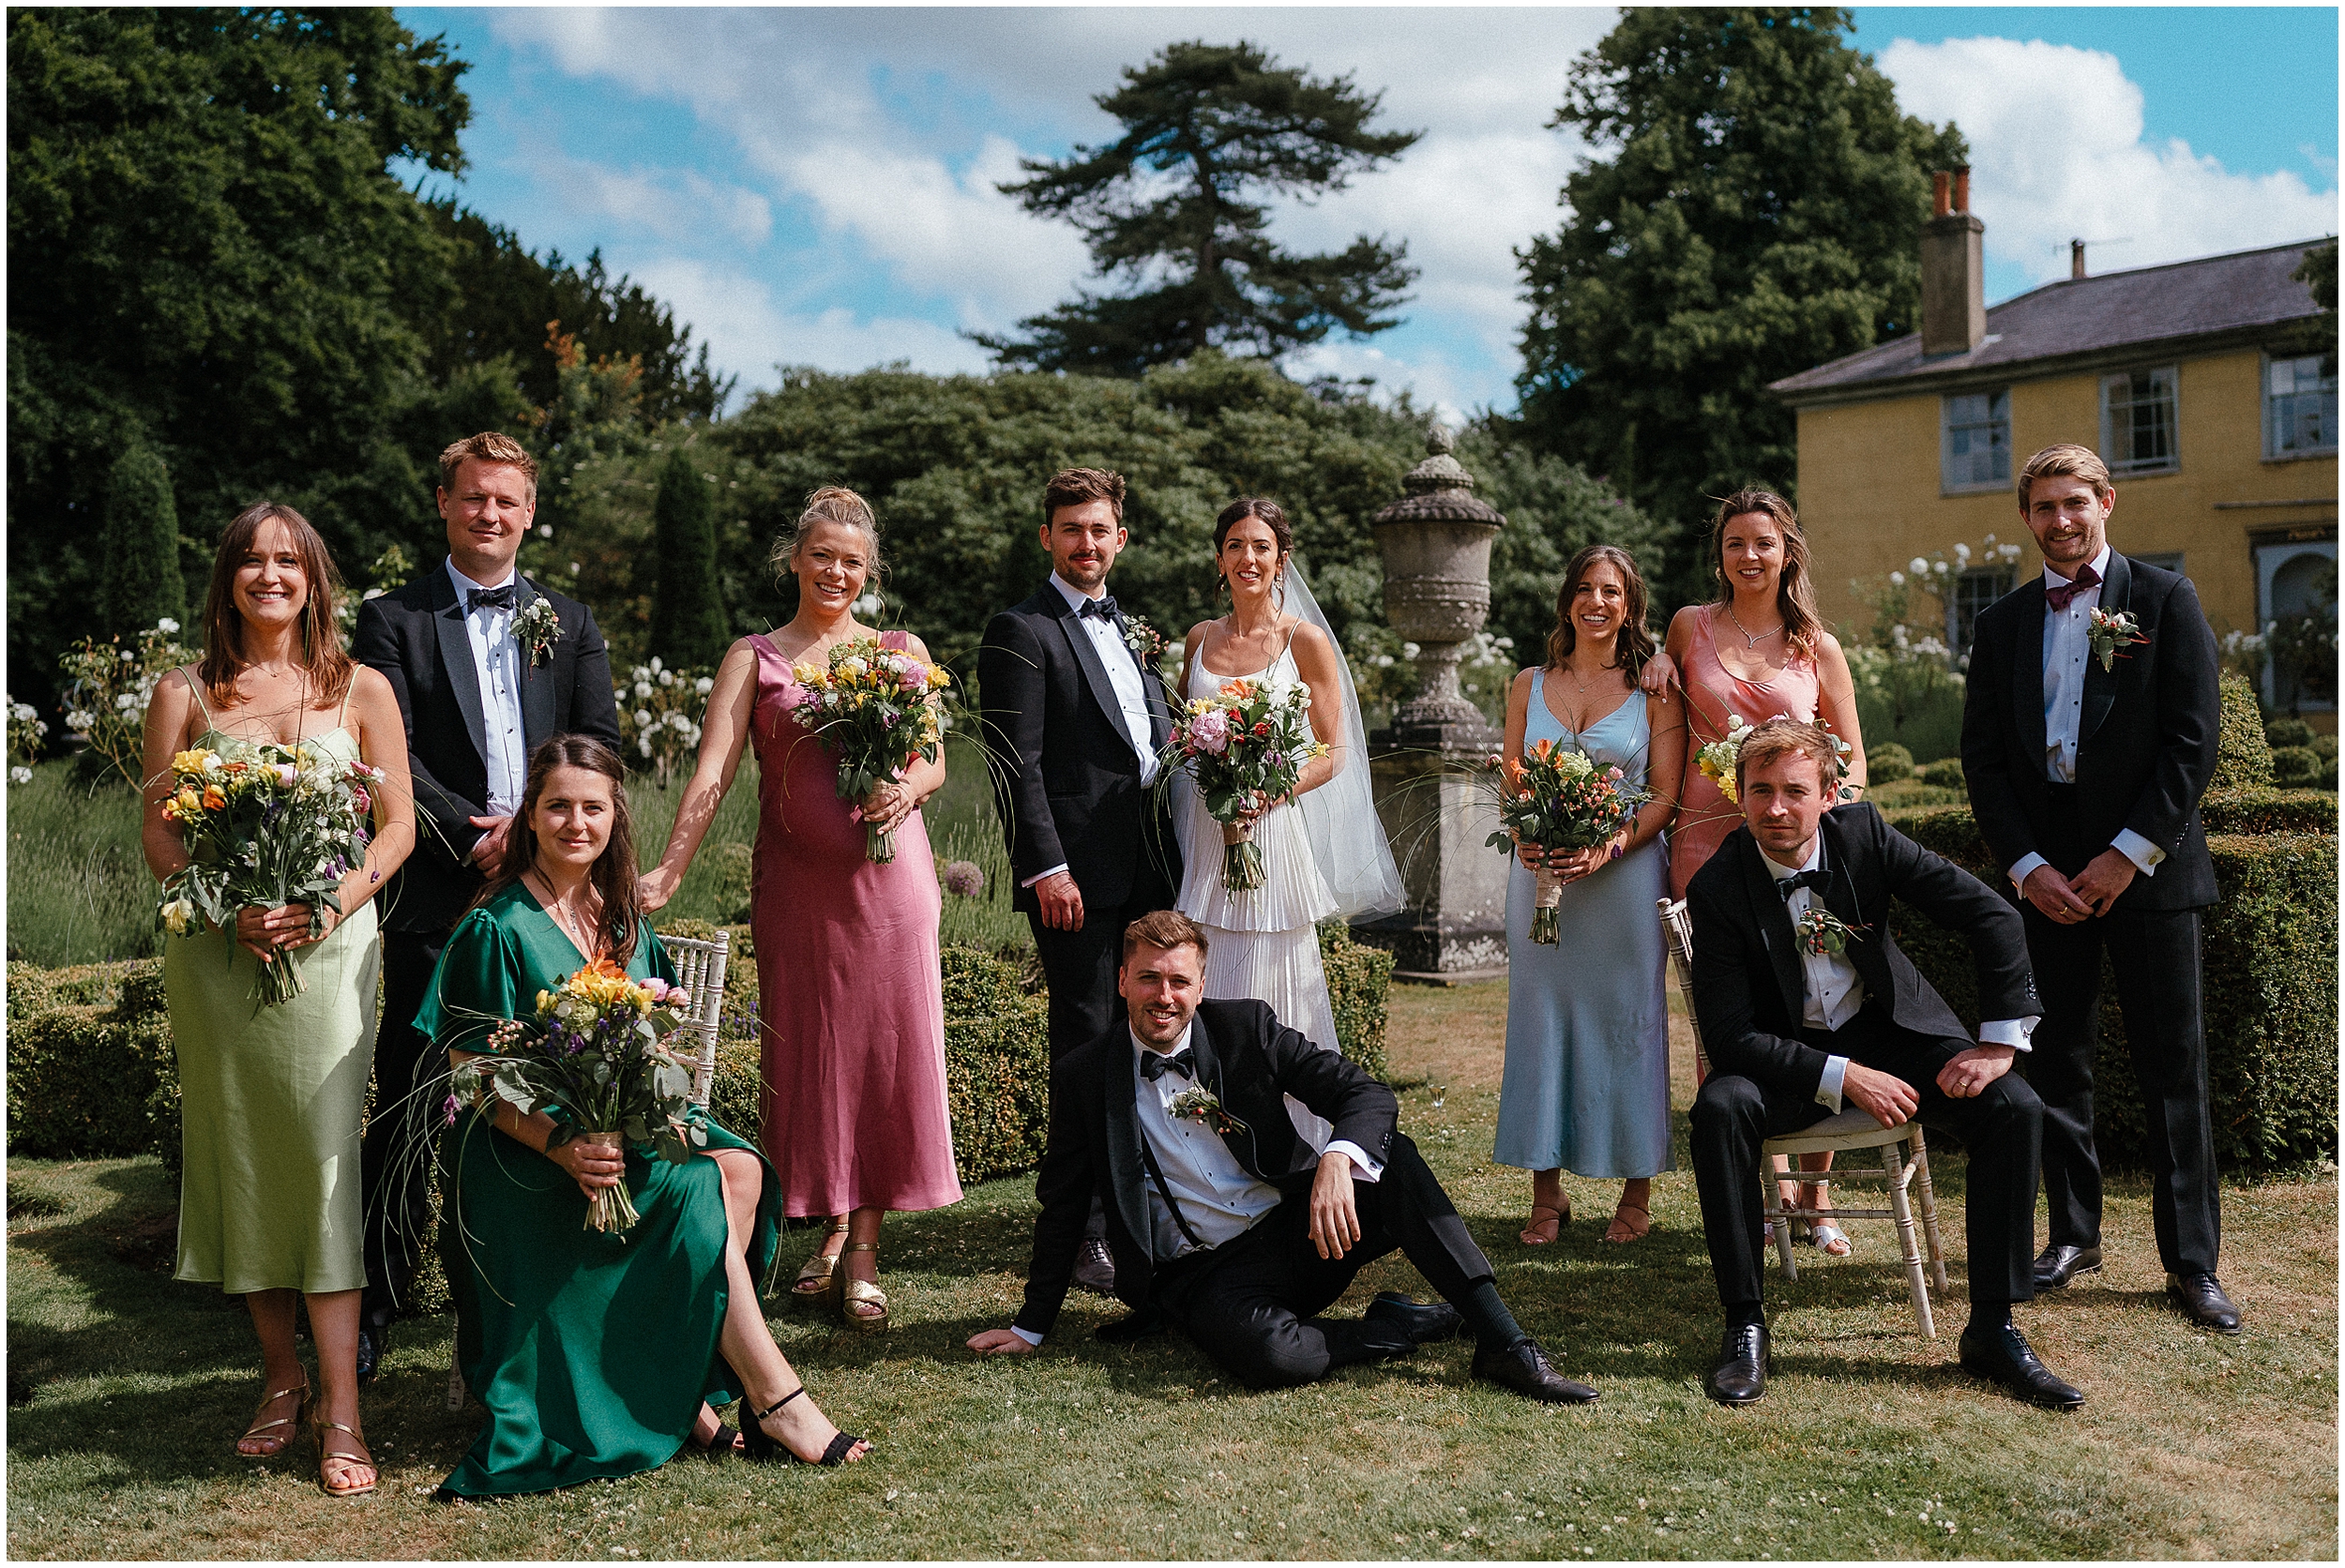 A wedding party in the gardens of the old rectory estate. 